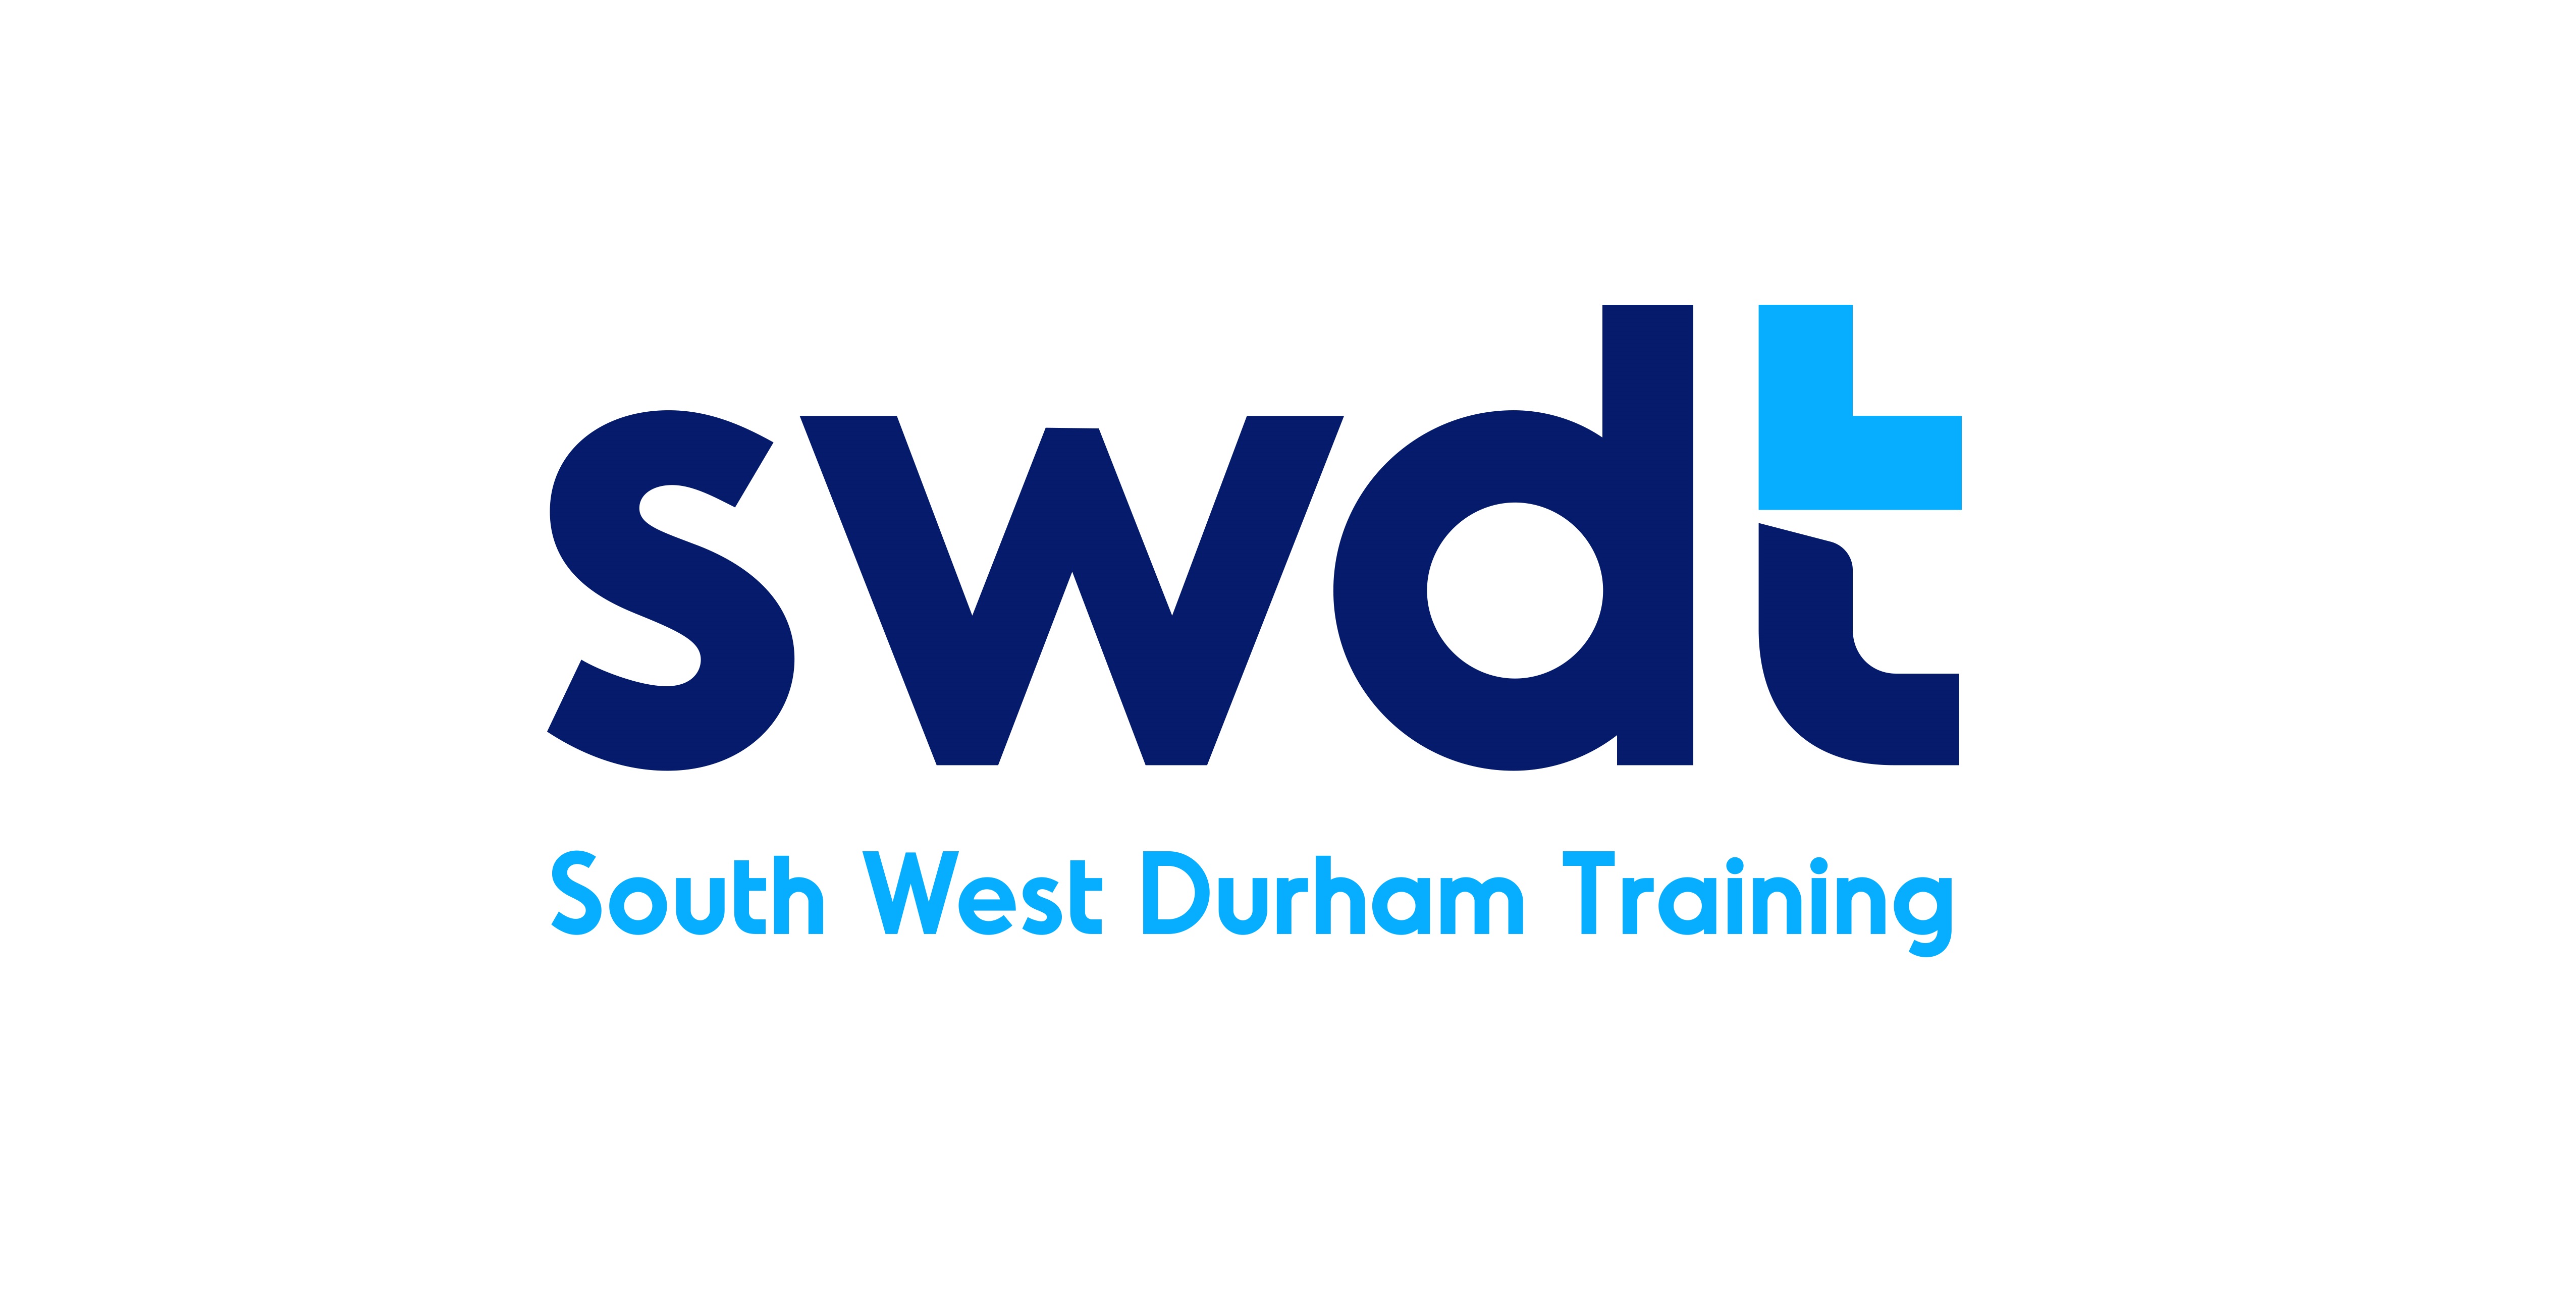 SWDT has introduced a T-Level qualification in maintenance, installation and repair for engineering and manufacturing